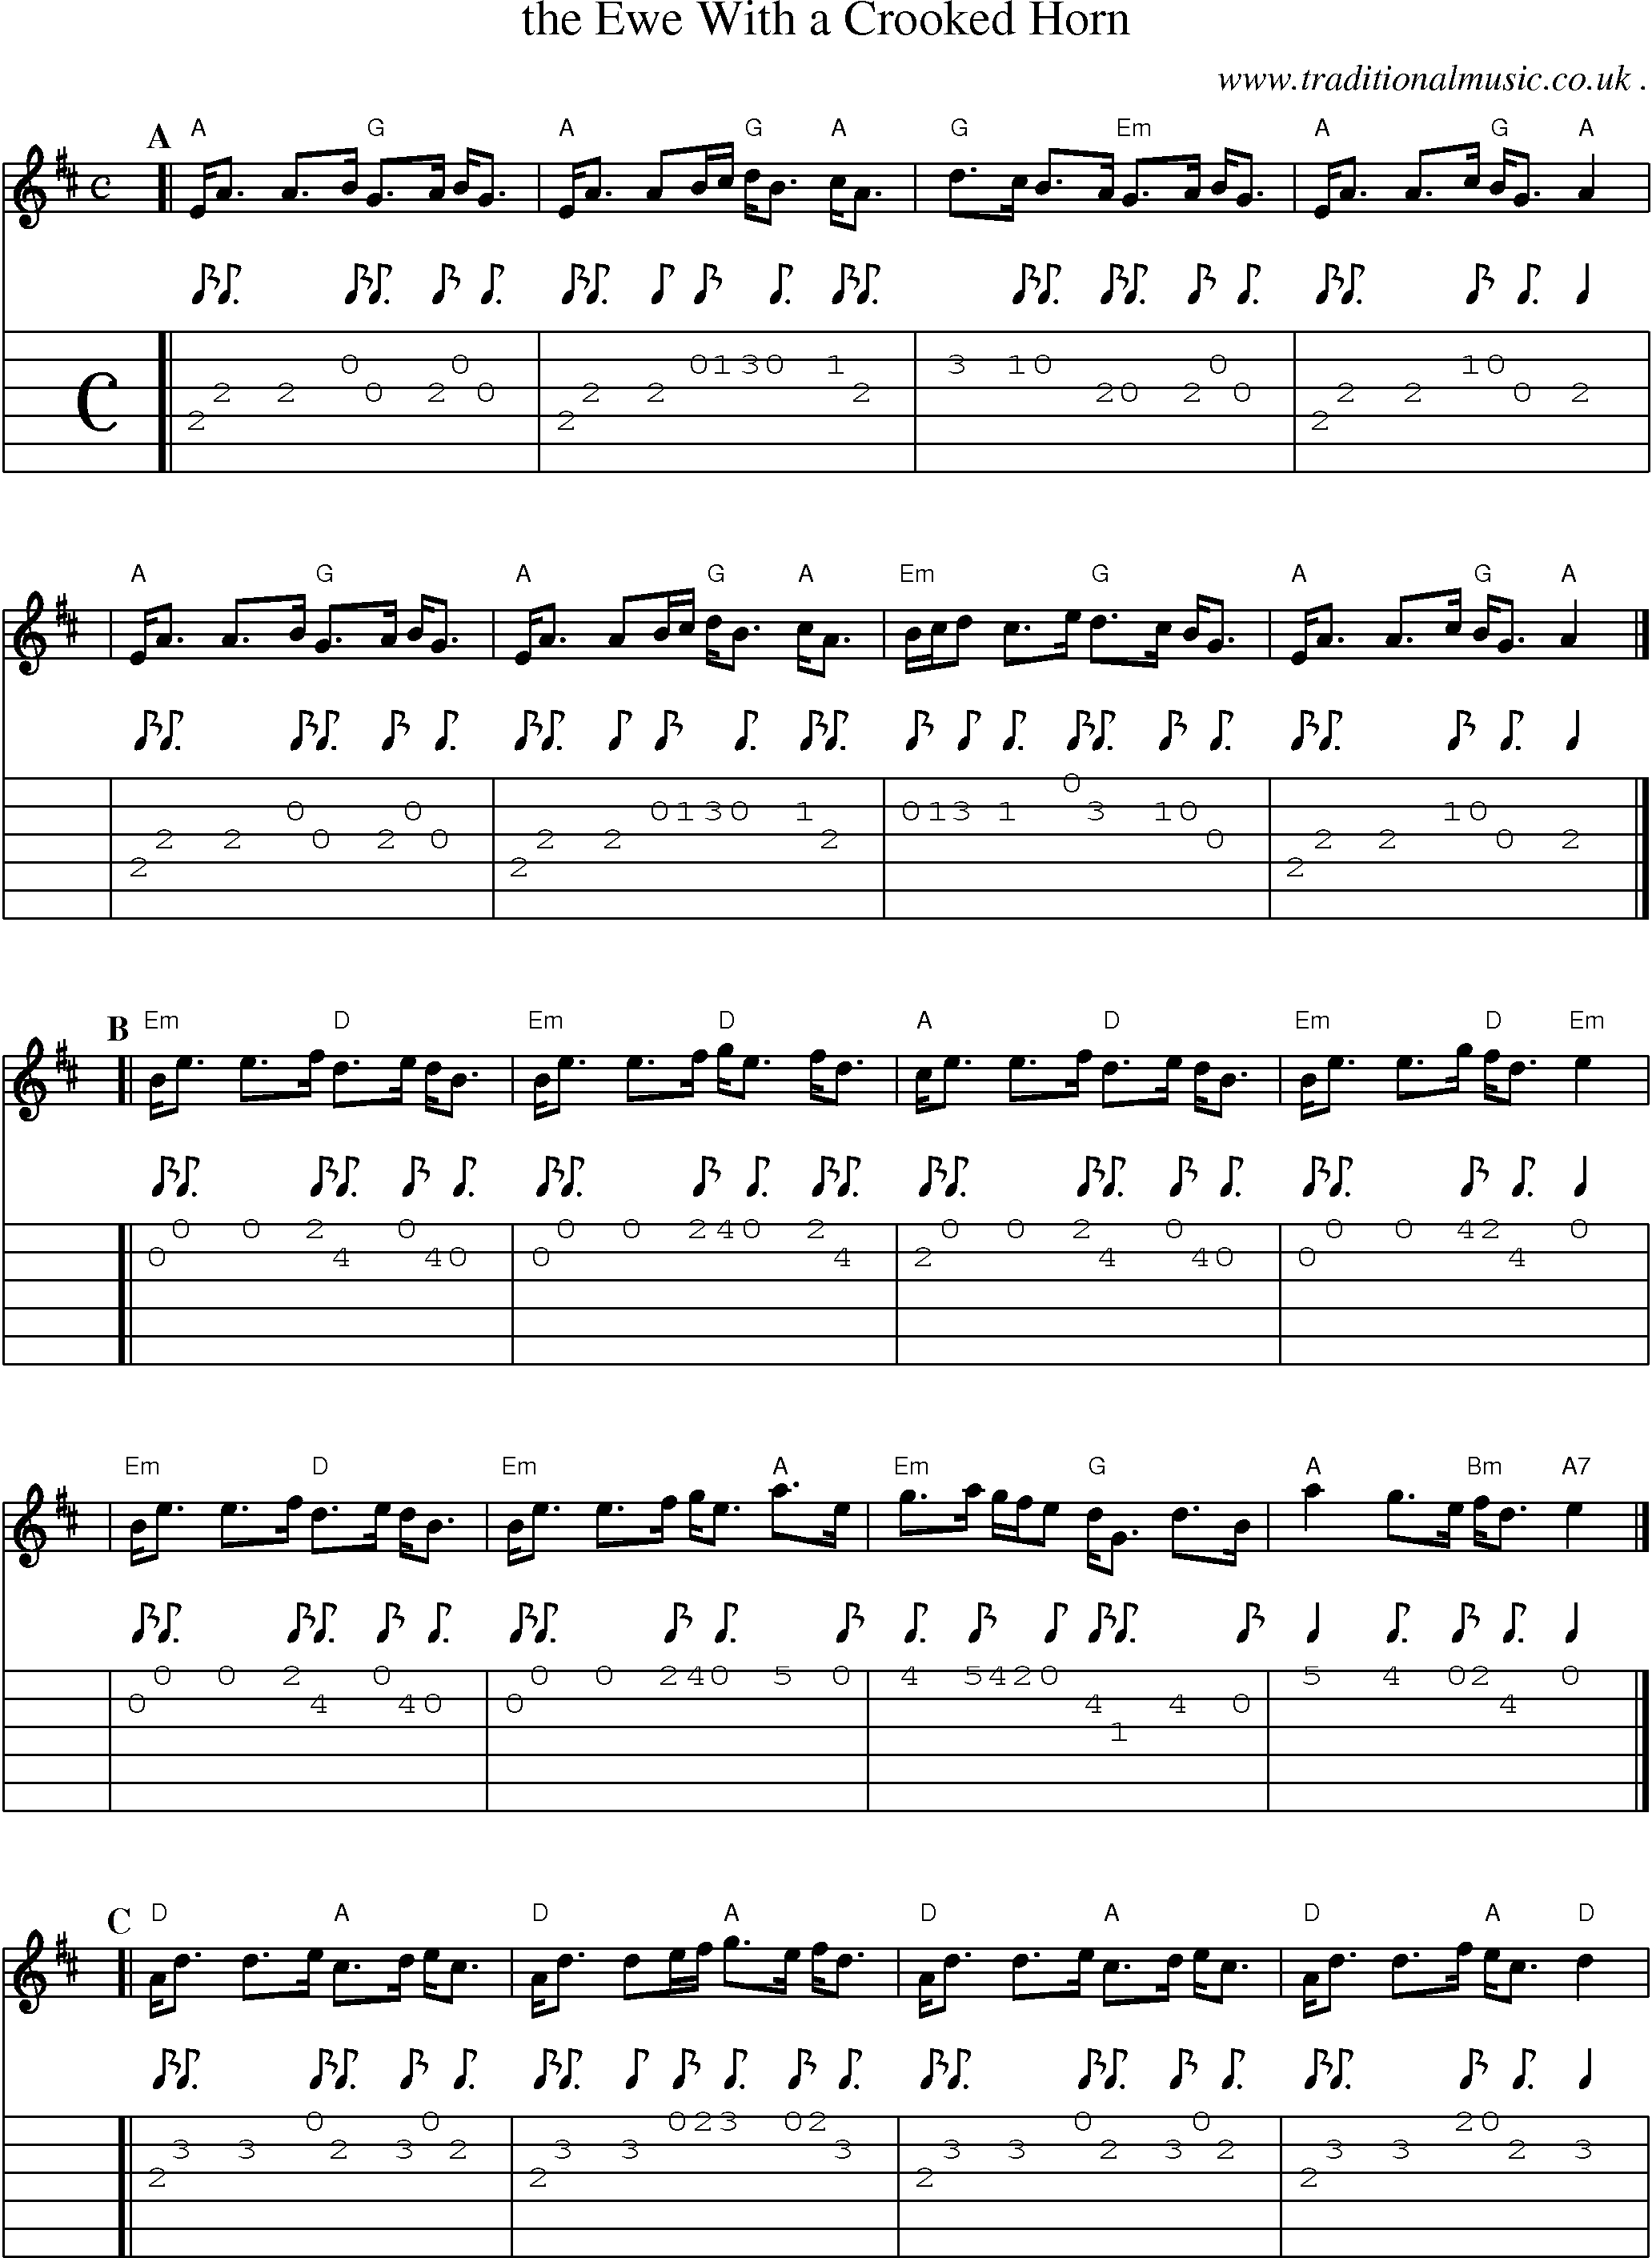 Sheet-music  score, Chords and Guitar Tabs for The Ewe With A Crooked Horn